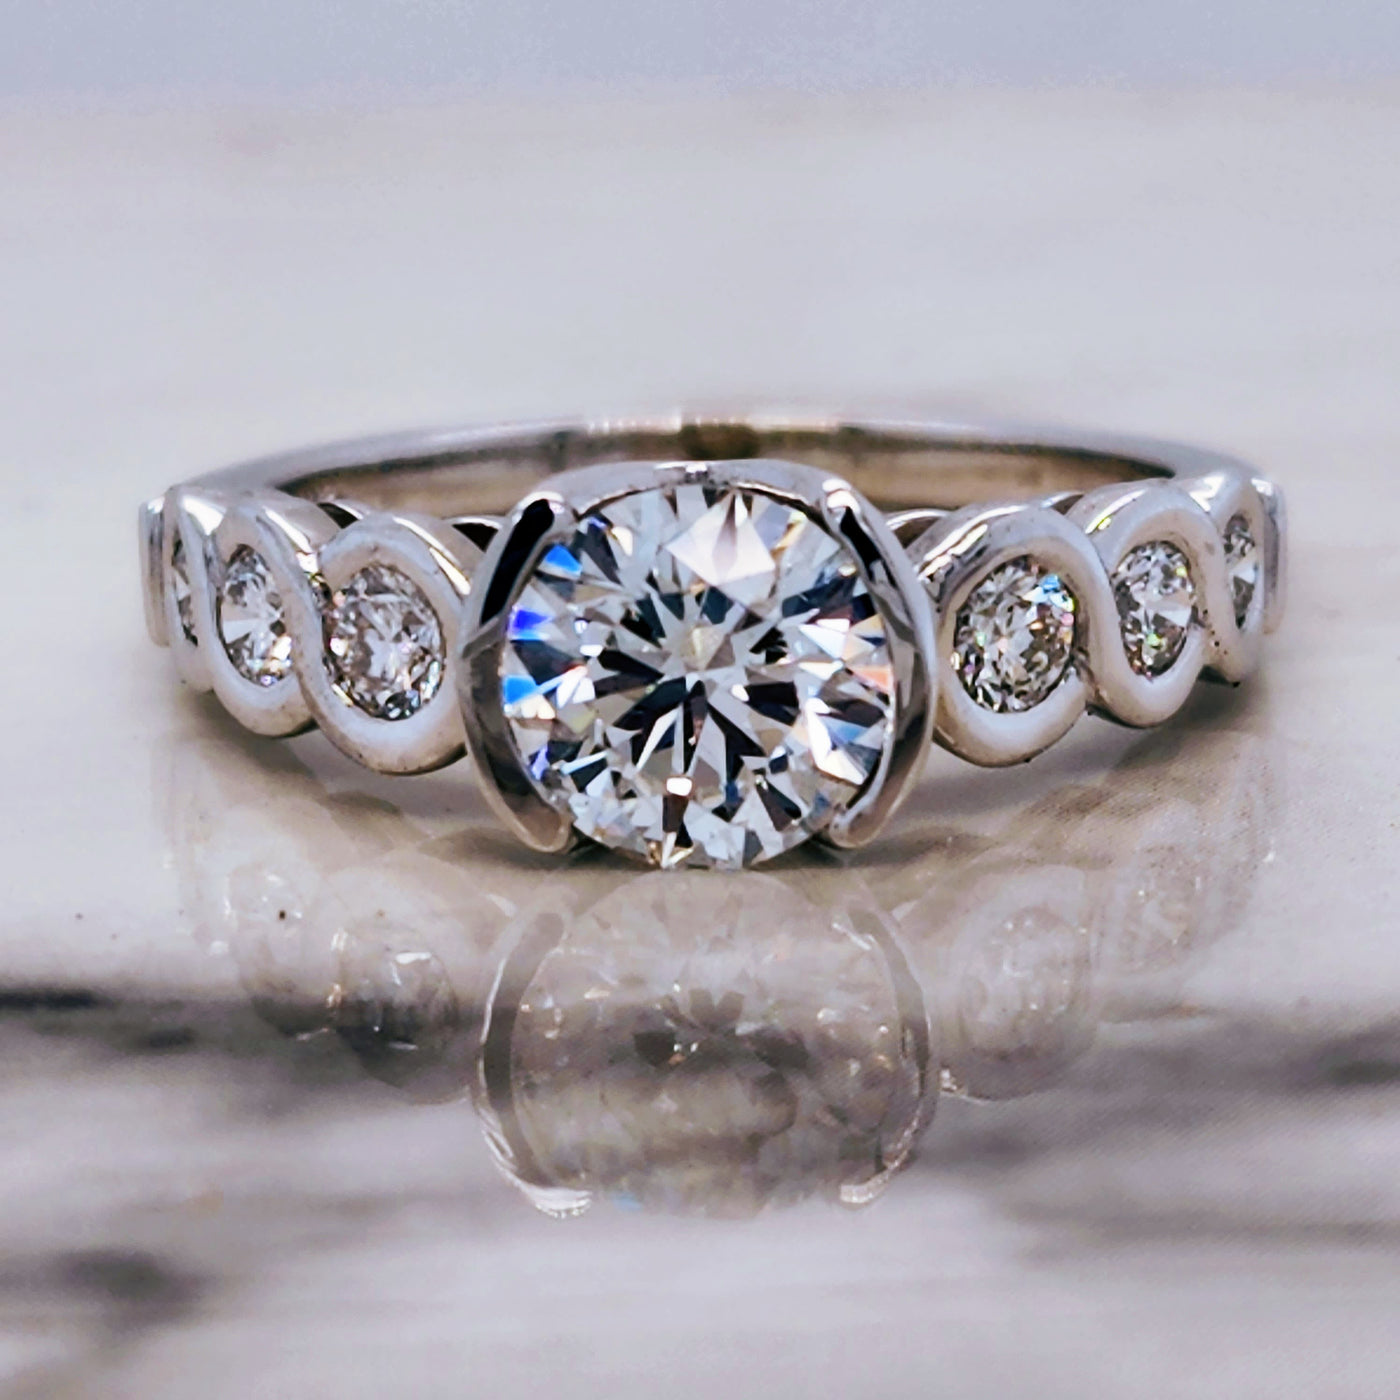 White Gold Engagement Ring With Round Half Bezel Diamond Center and Bezel Accents